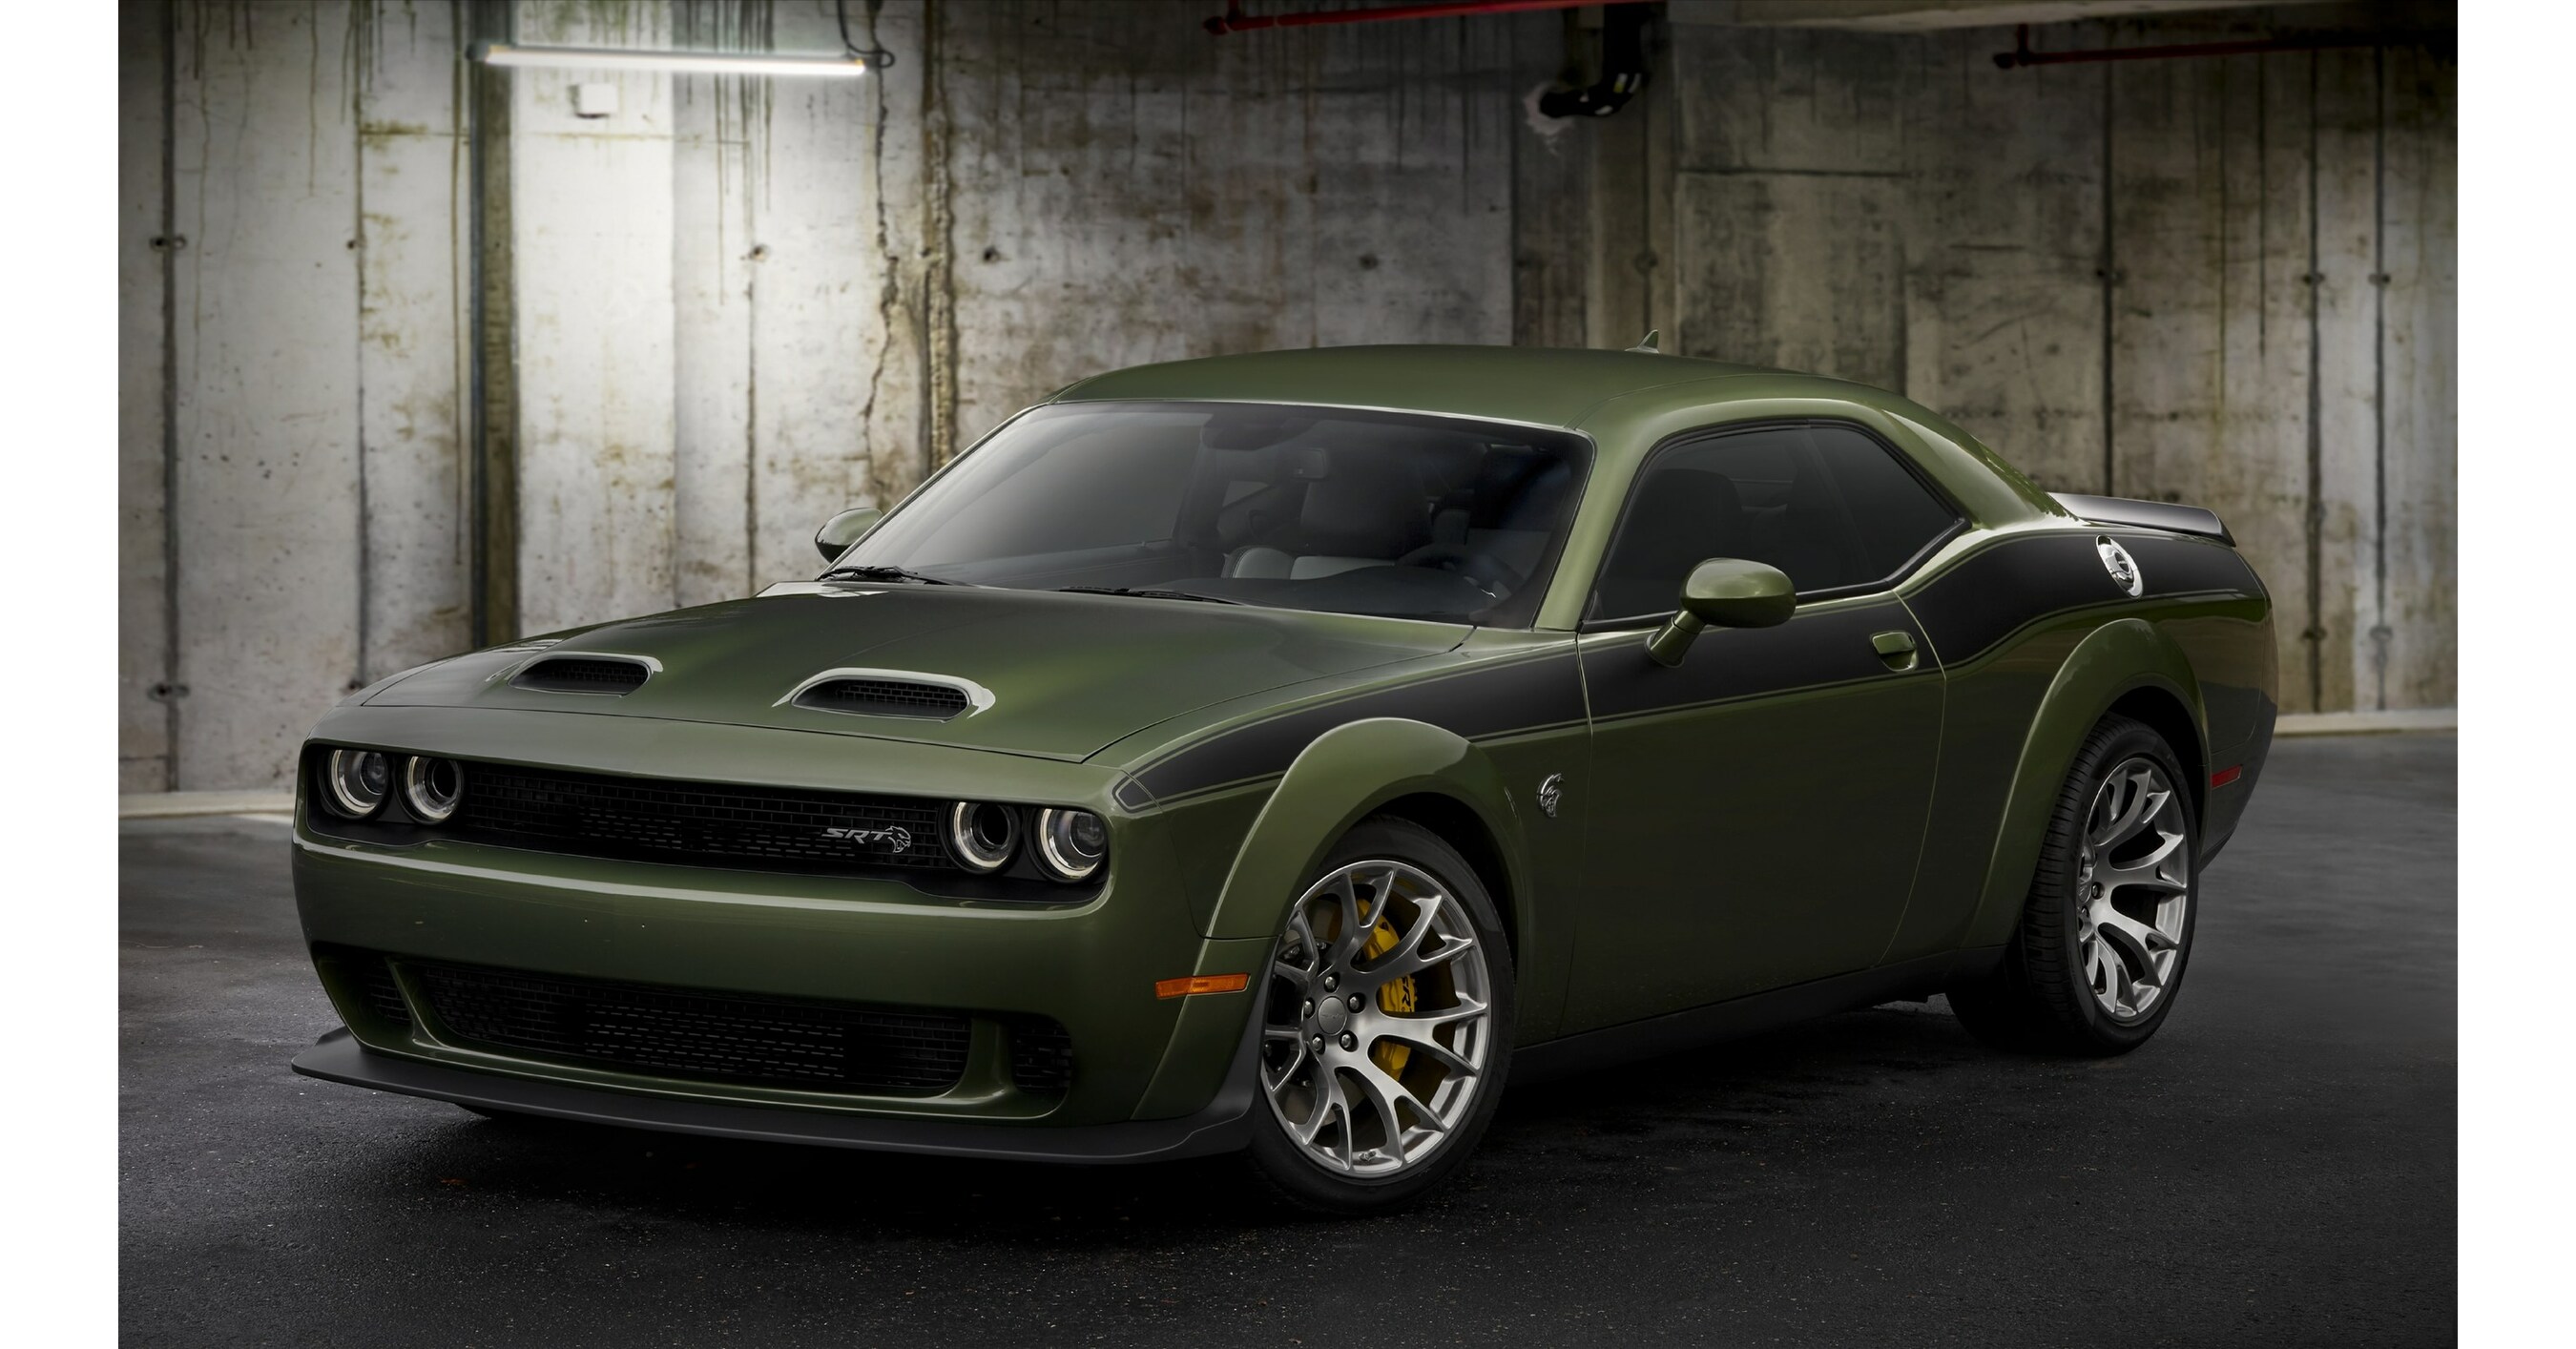 The Dodge Challenger is America's best selling sports car  again